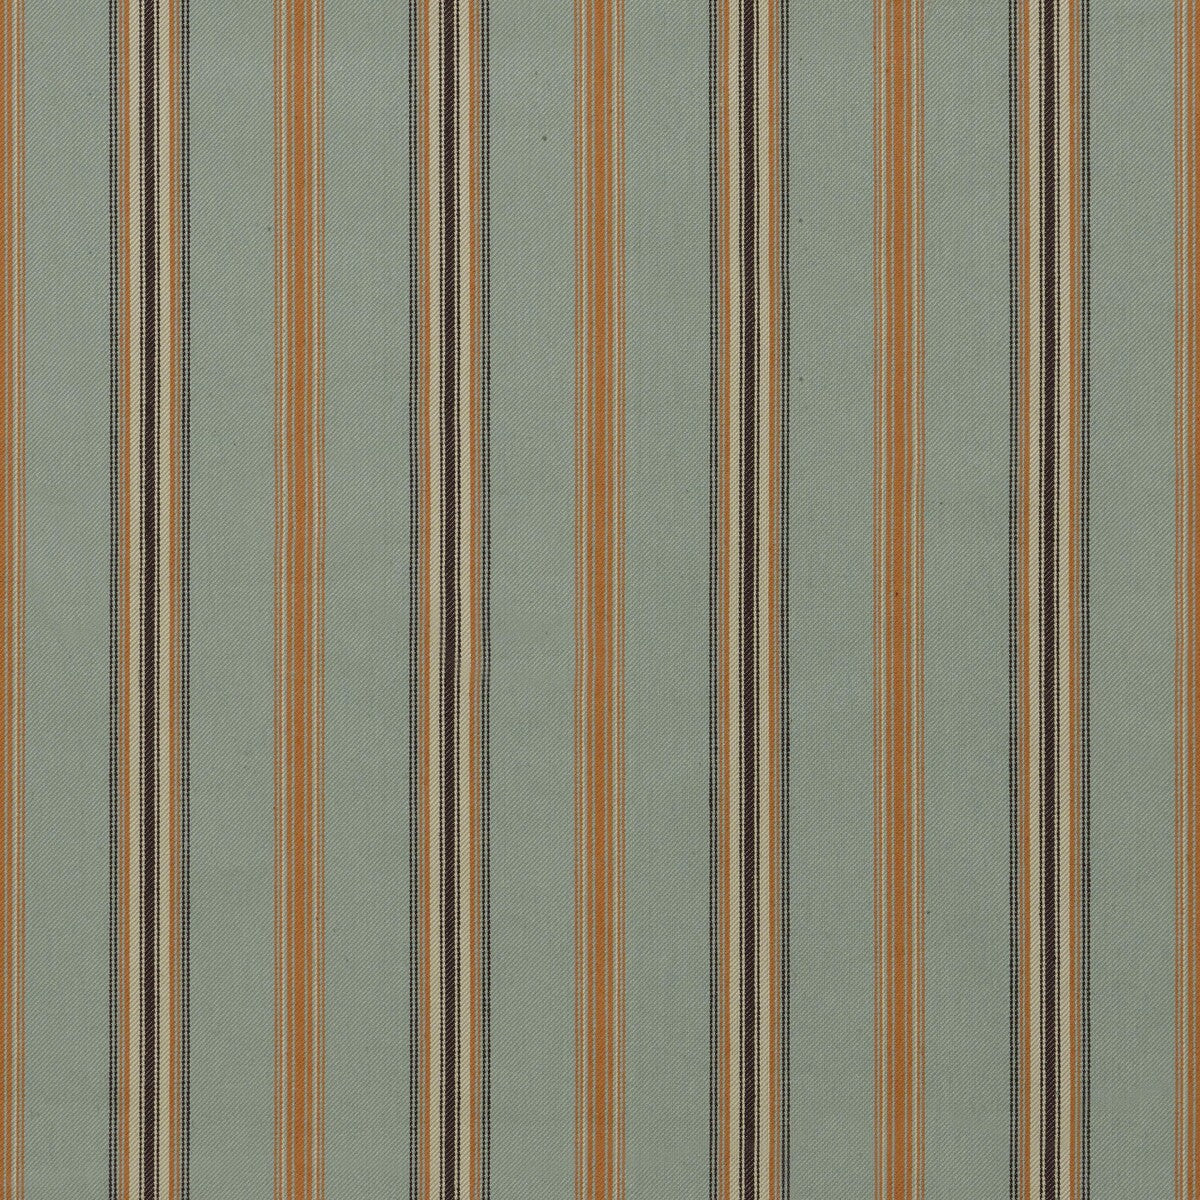 Canfield Stripe fabric in mist color - pattern BFC-3670.13.0 - by Lee Jofa in the Blithfield collection